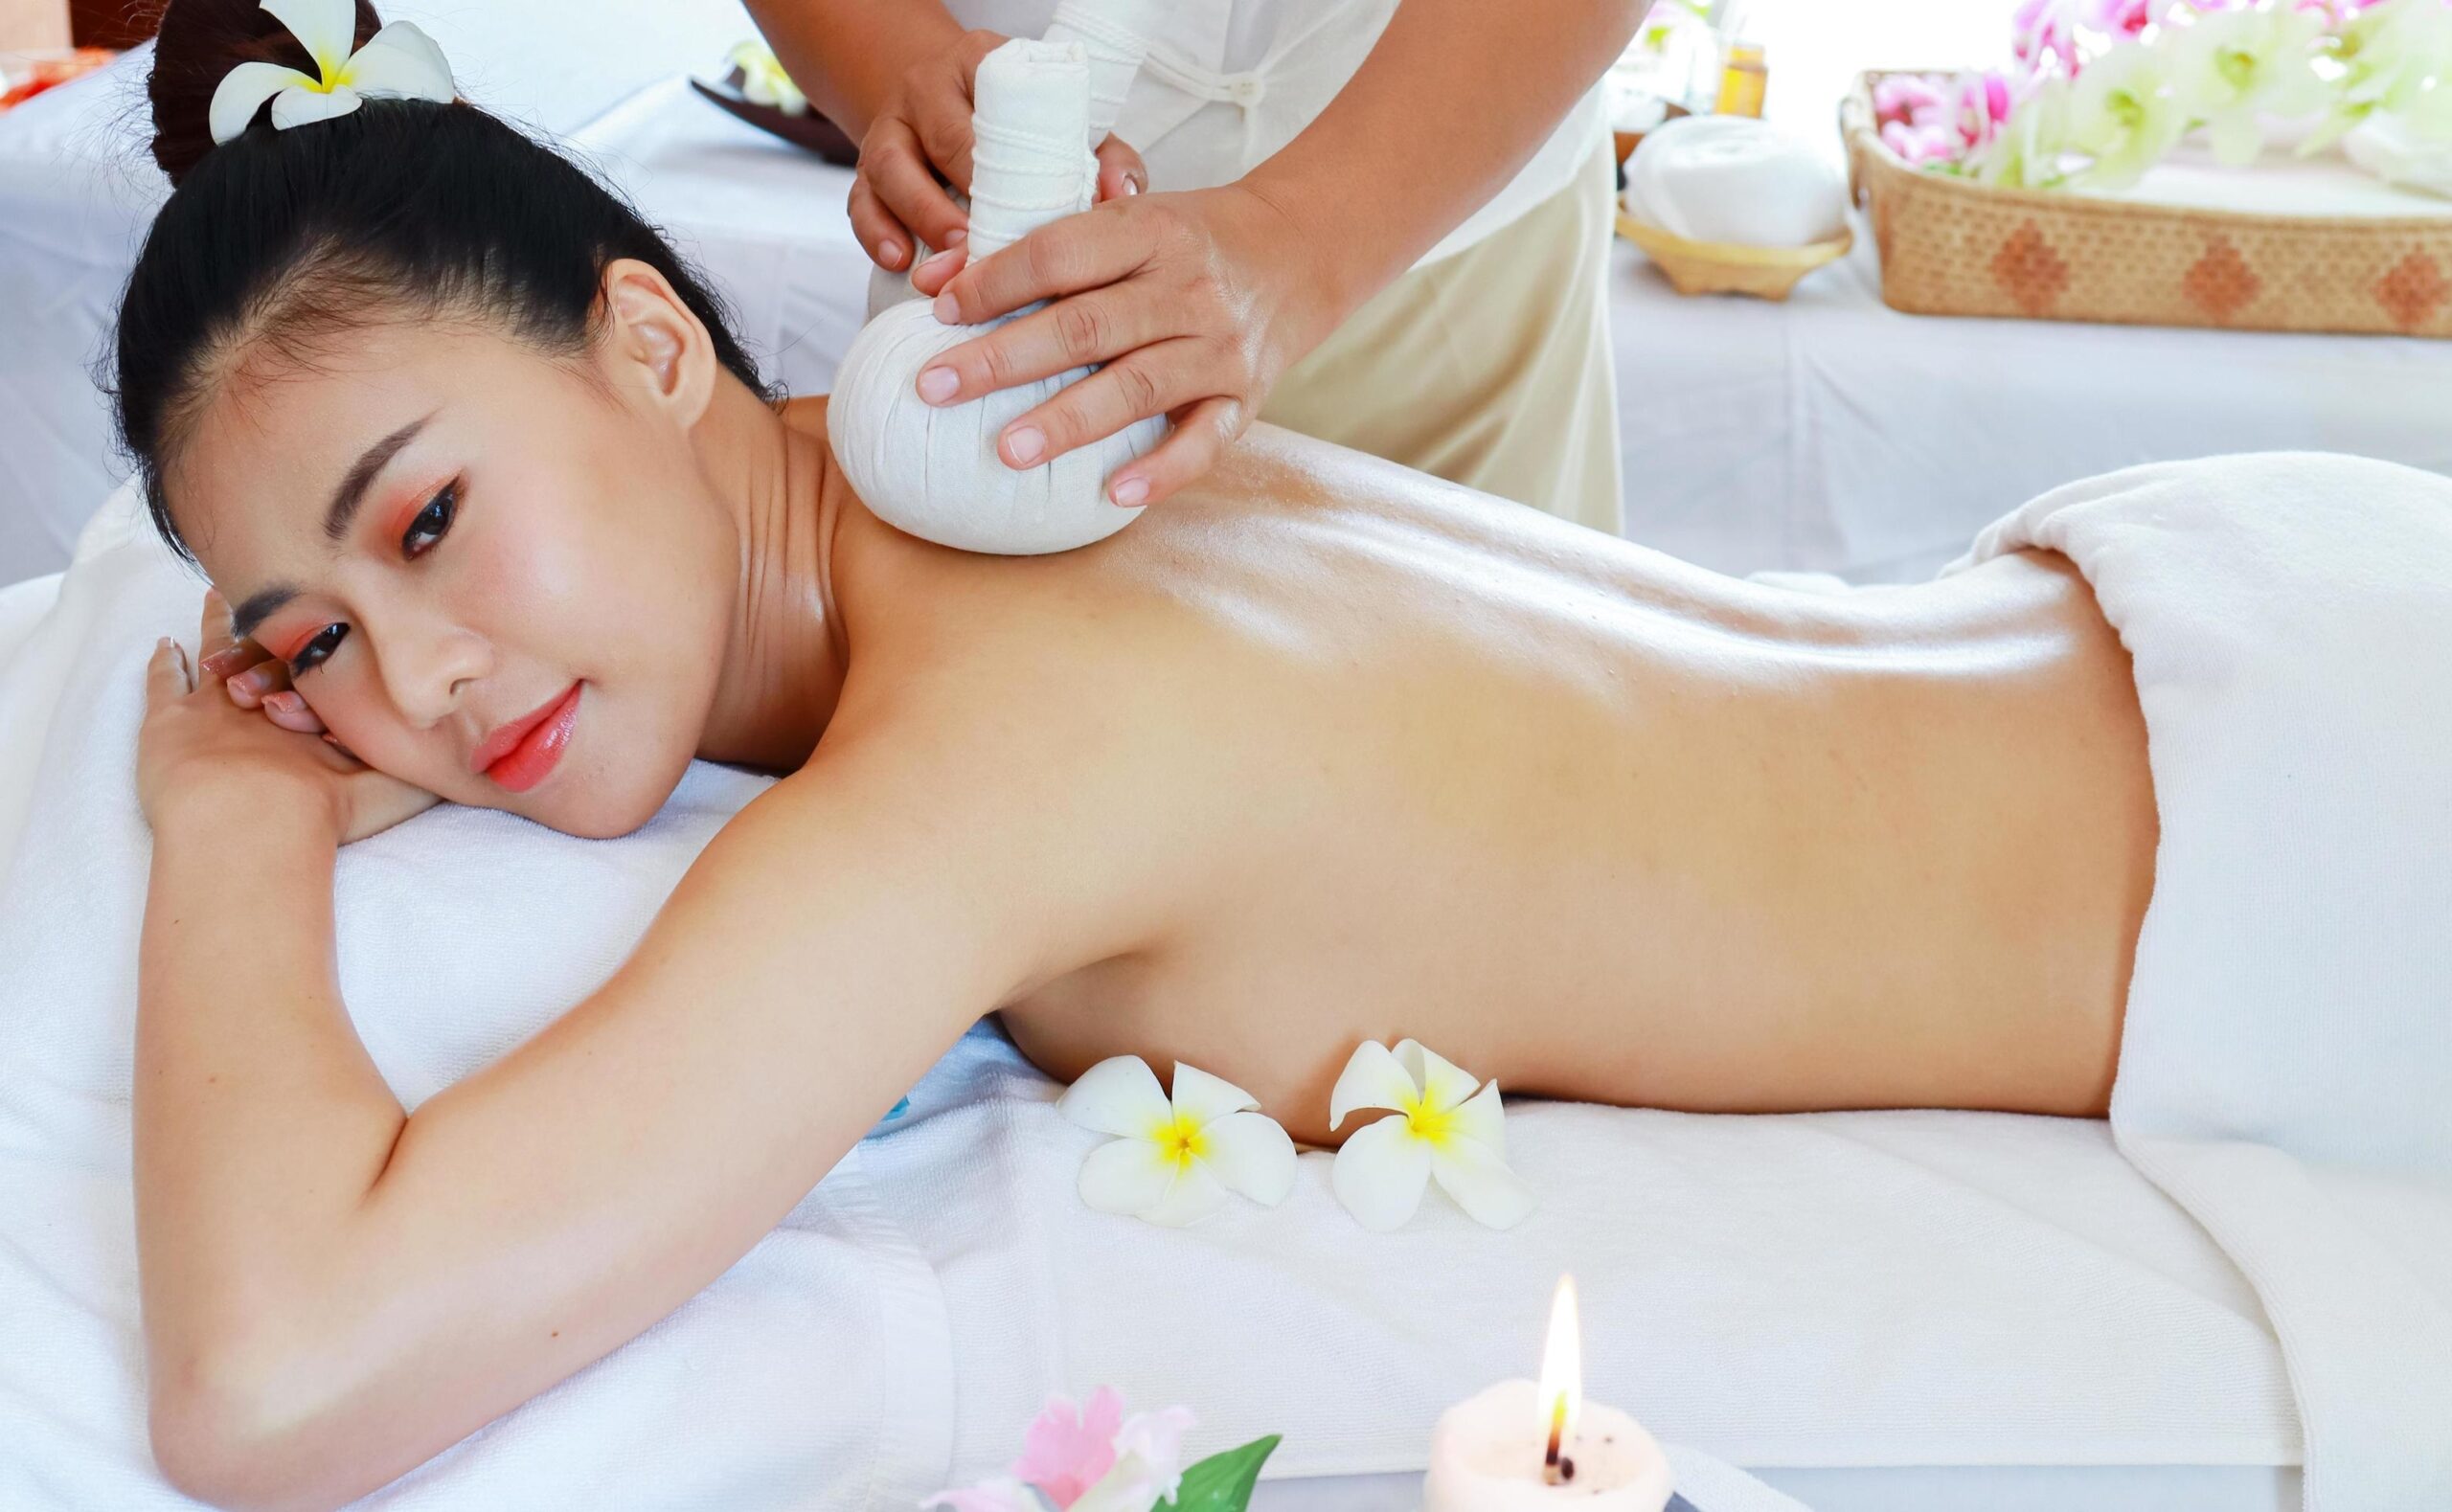 The Story of Massage: From Past to Present